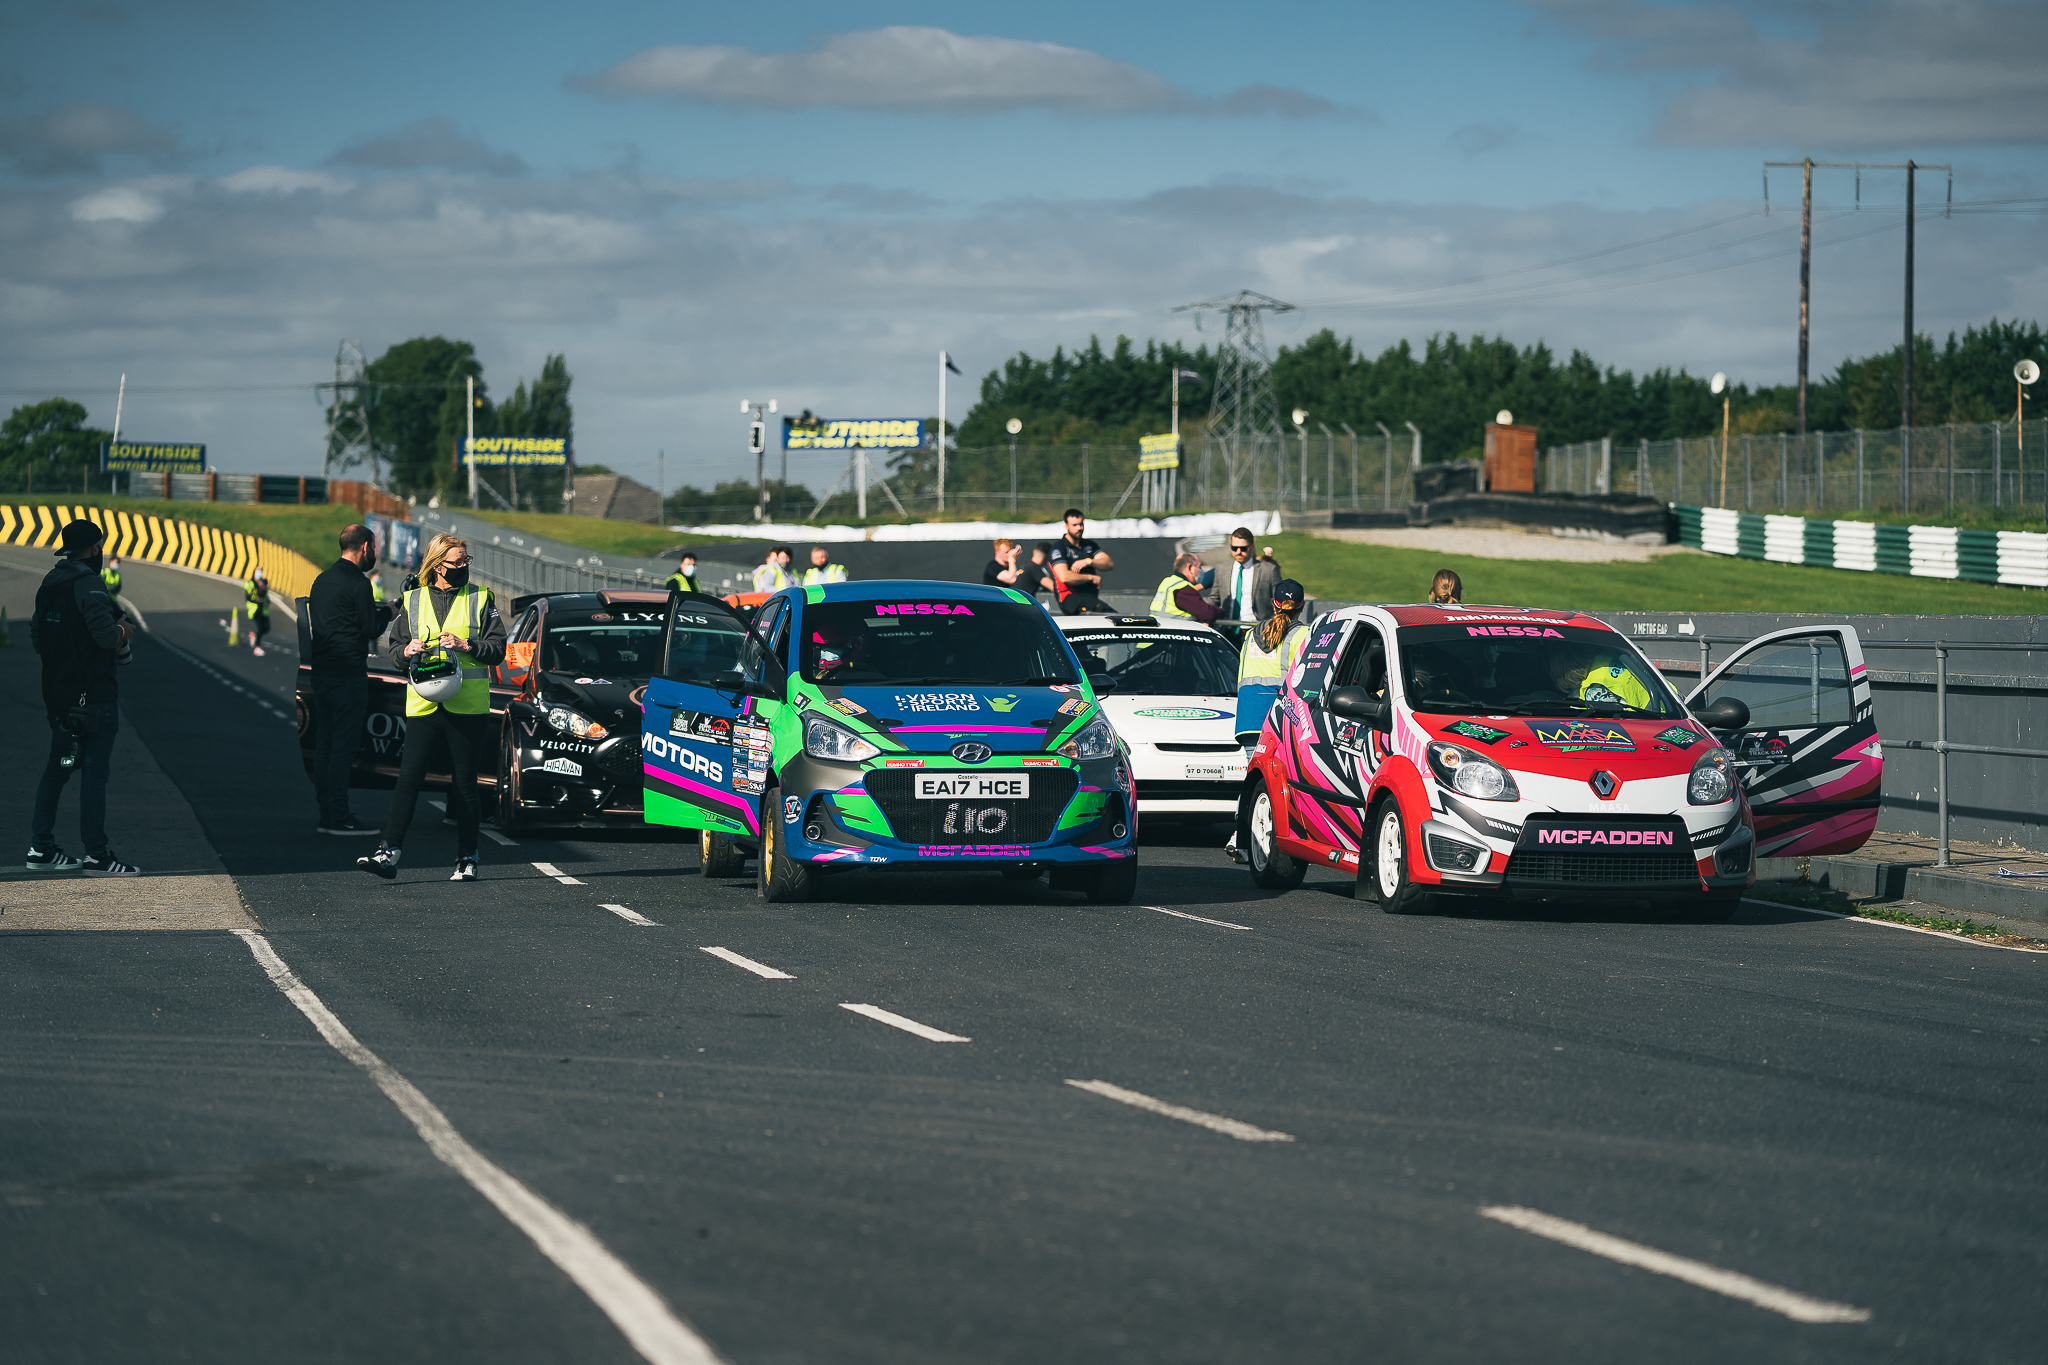 A group of rally cars ready to bunch up and take off at a Vision Sports Ireland motorsport event